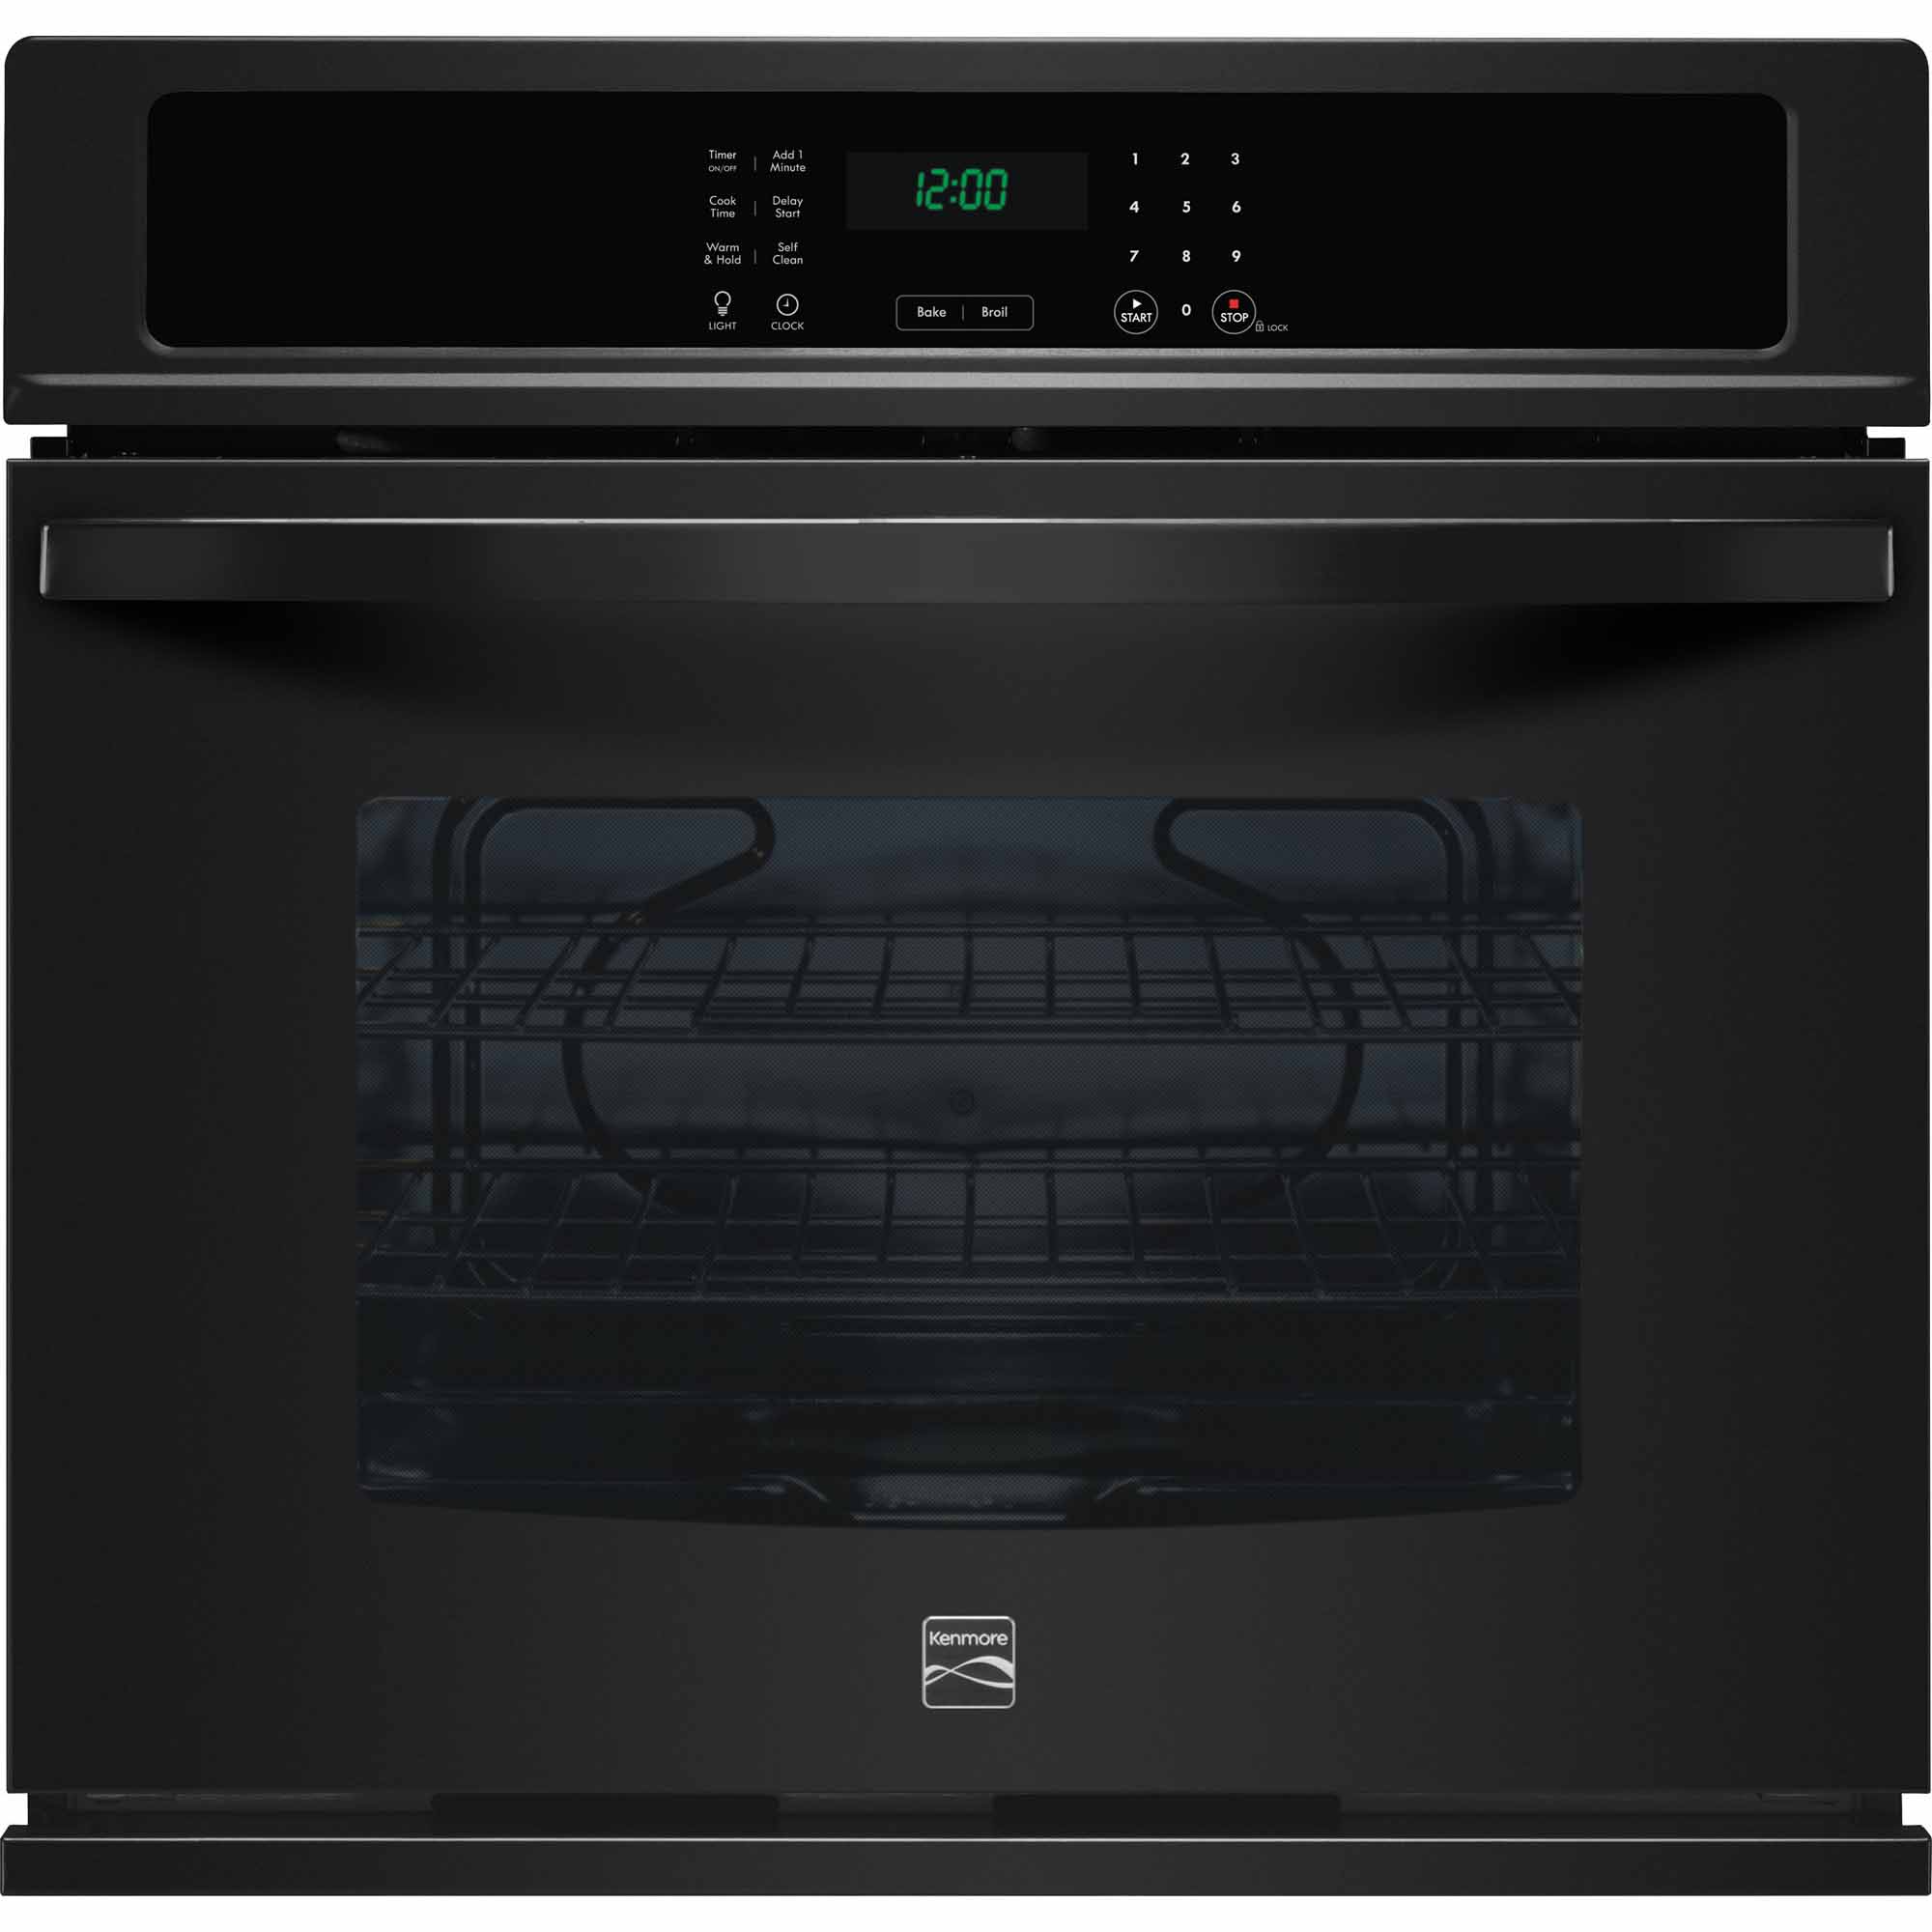 kenmore elite 27 double wall oven installation manual